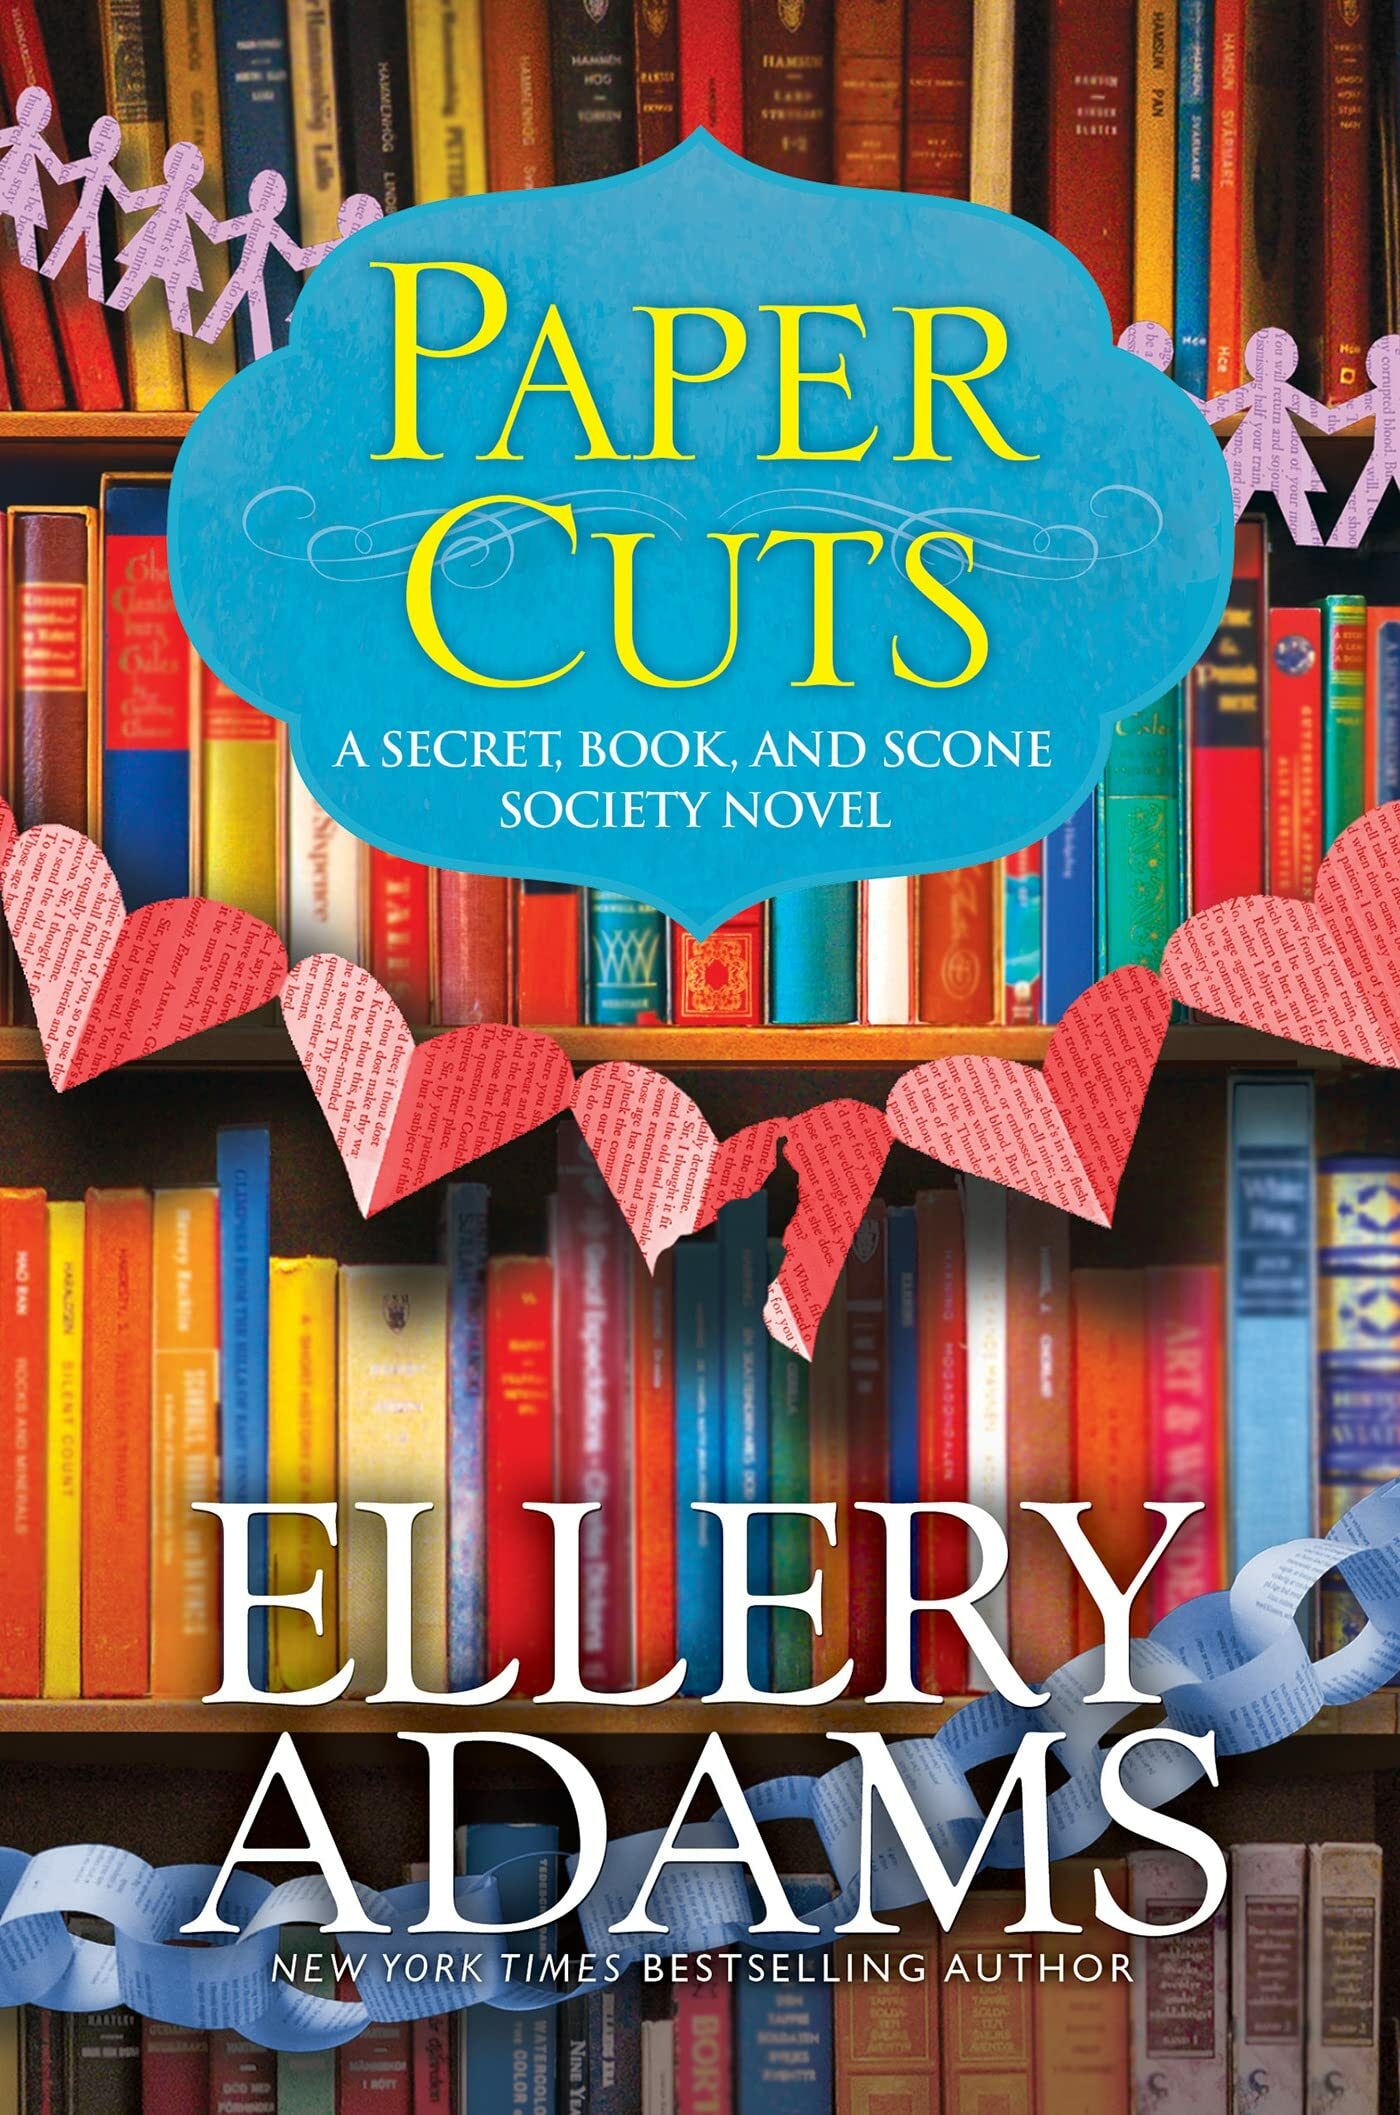 Paper Cuts (A Secret, Book, and Scone Society Novel #6)